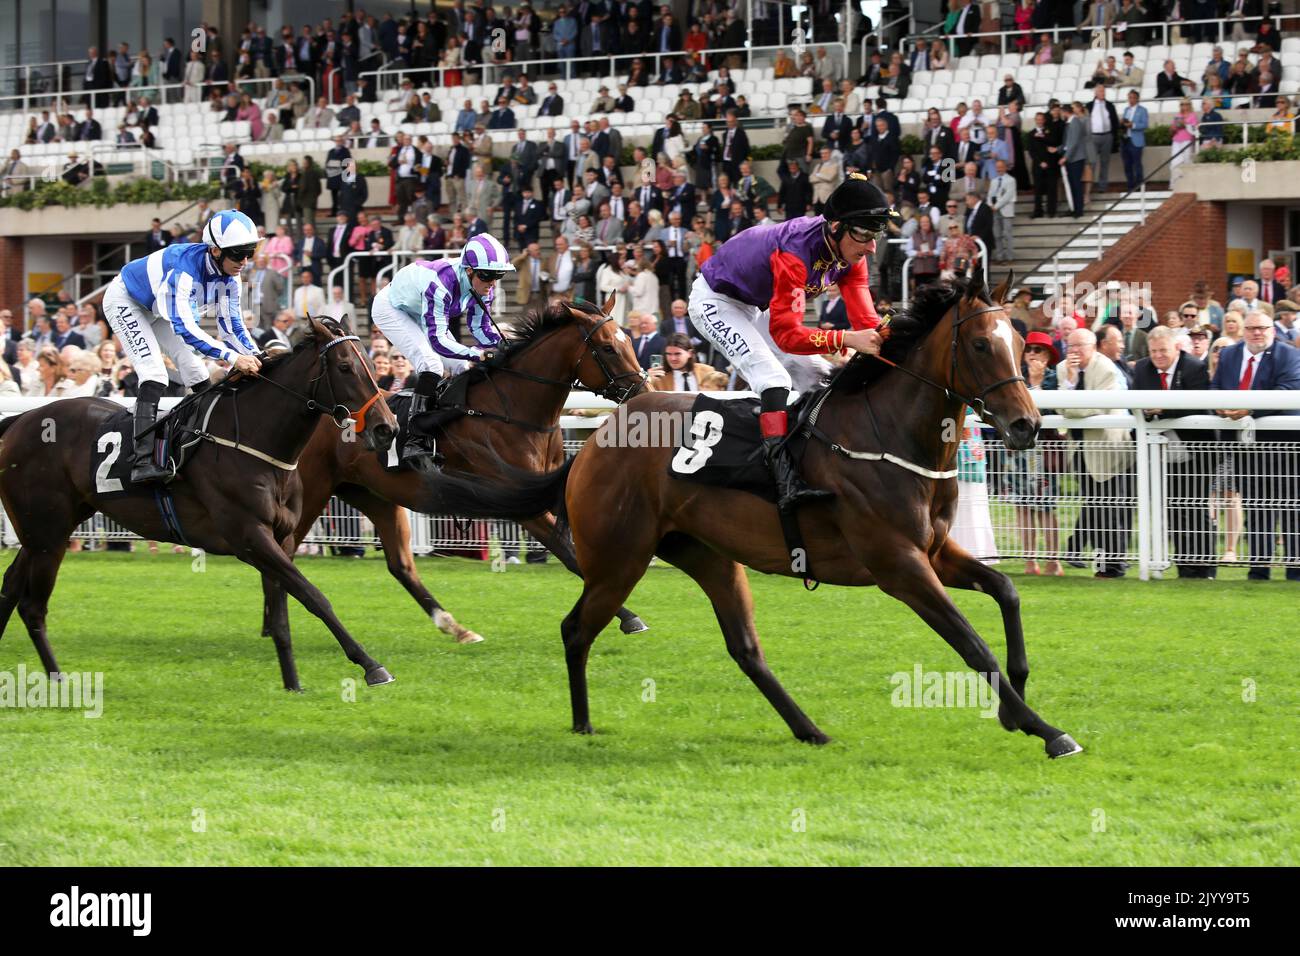 Chichester, West Sussex, UK. The Queen was a winning owner for the final time on Tuesday – the same day she officially appointed Liz Truss to become the 15th prime minister of her reign – when the Clive Cox-trained Love Affairs landed a Goodwood nursery winner under Adam Kirby. Stock Photo